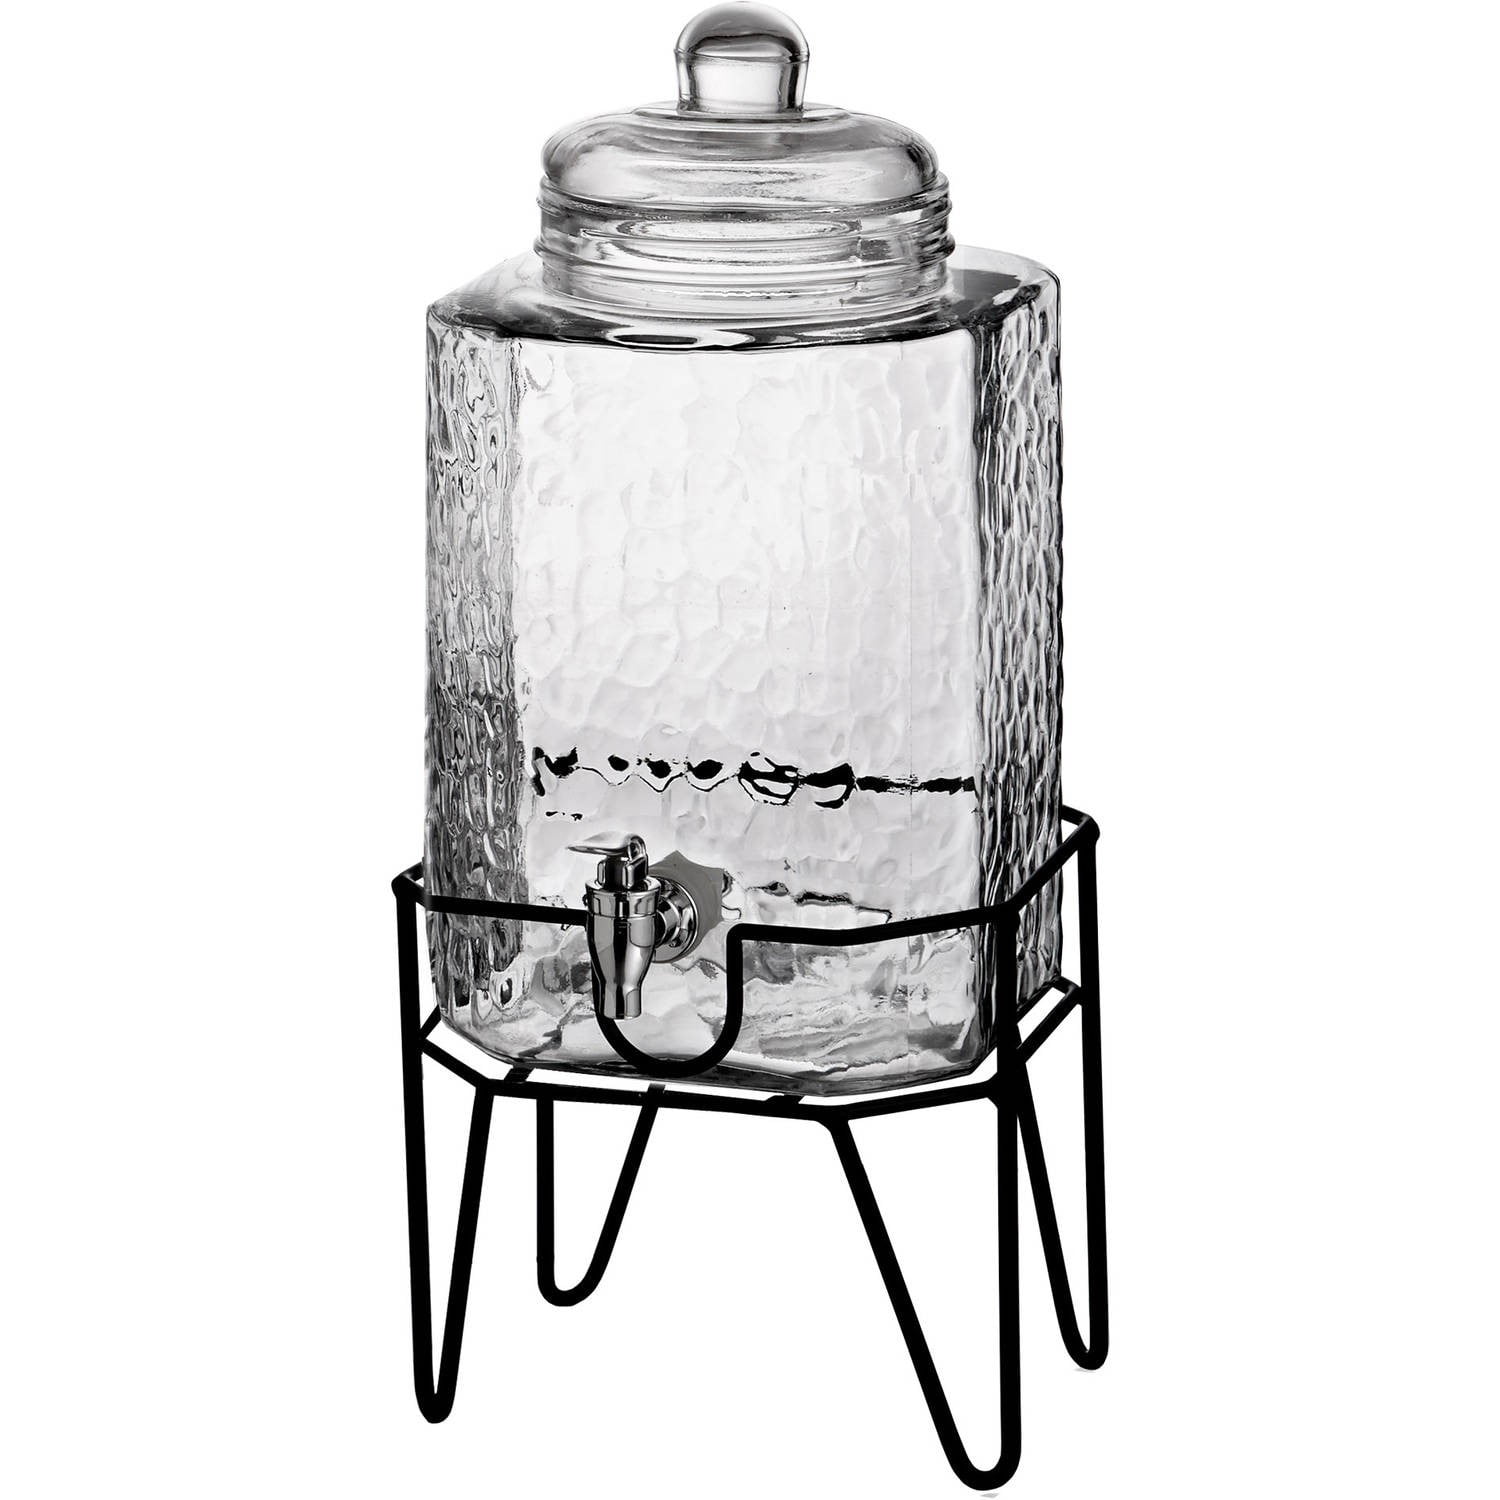 DOUBLE 1 GALLON HAMMERED DISPENSER W/ANTIQUE SCROLL STAND